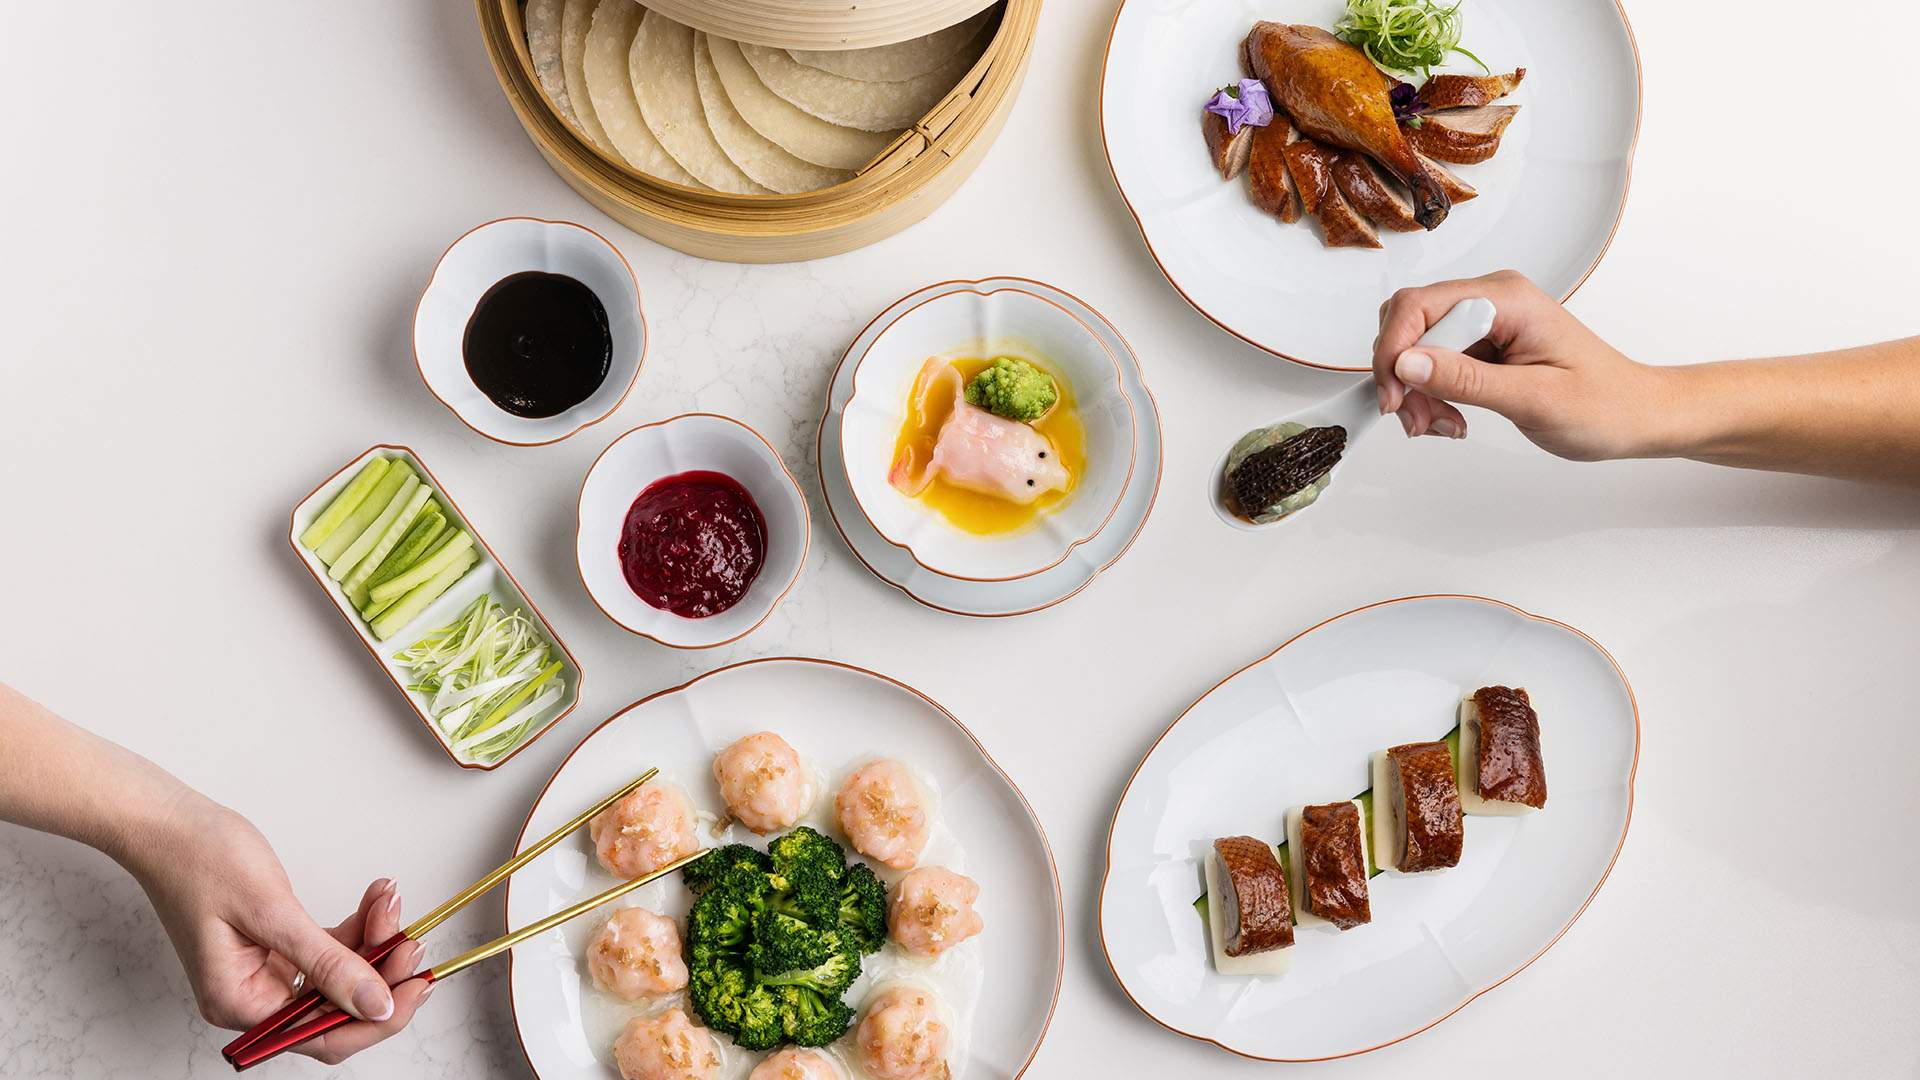 Michelin-Starred Cantonese Restaurant T'ang Court Has Opened an Australian Outpost on the Gold Coast